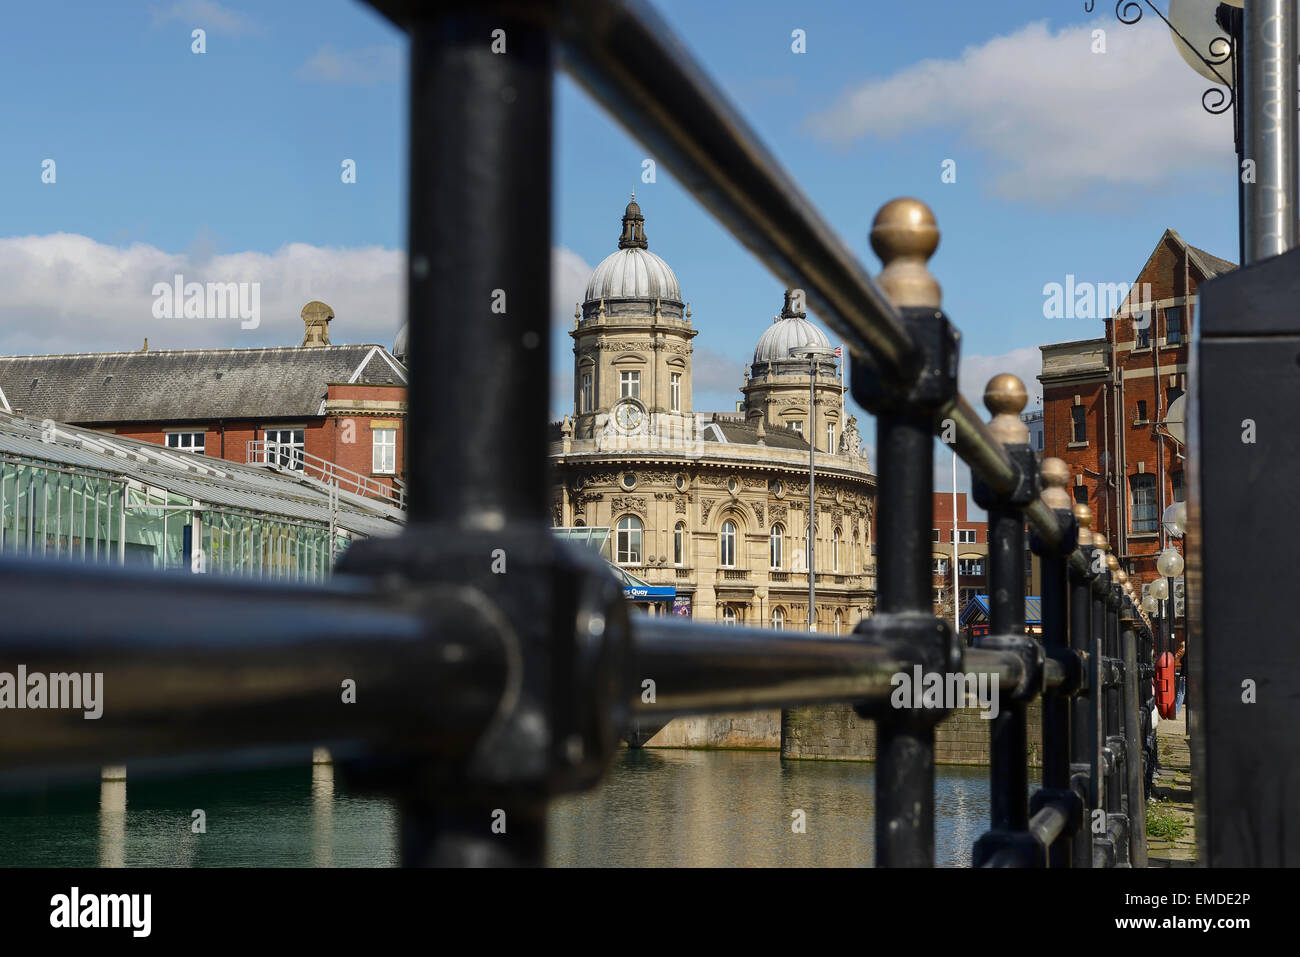 The Maritime Museum viewed through railings alongside the Princes Quay Shopping Centre and Princes Dock in Hull city centre UK Stock Photo